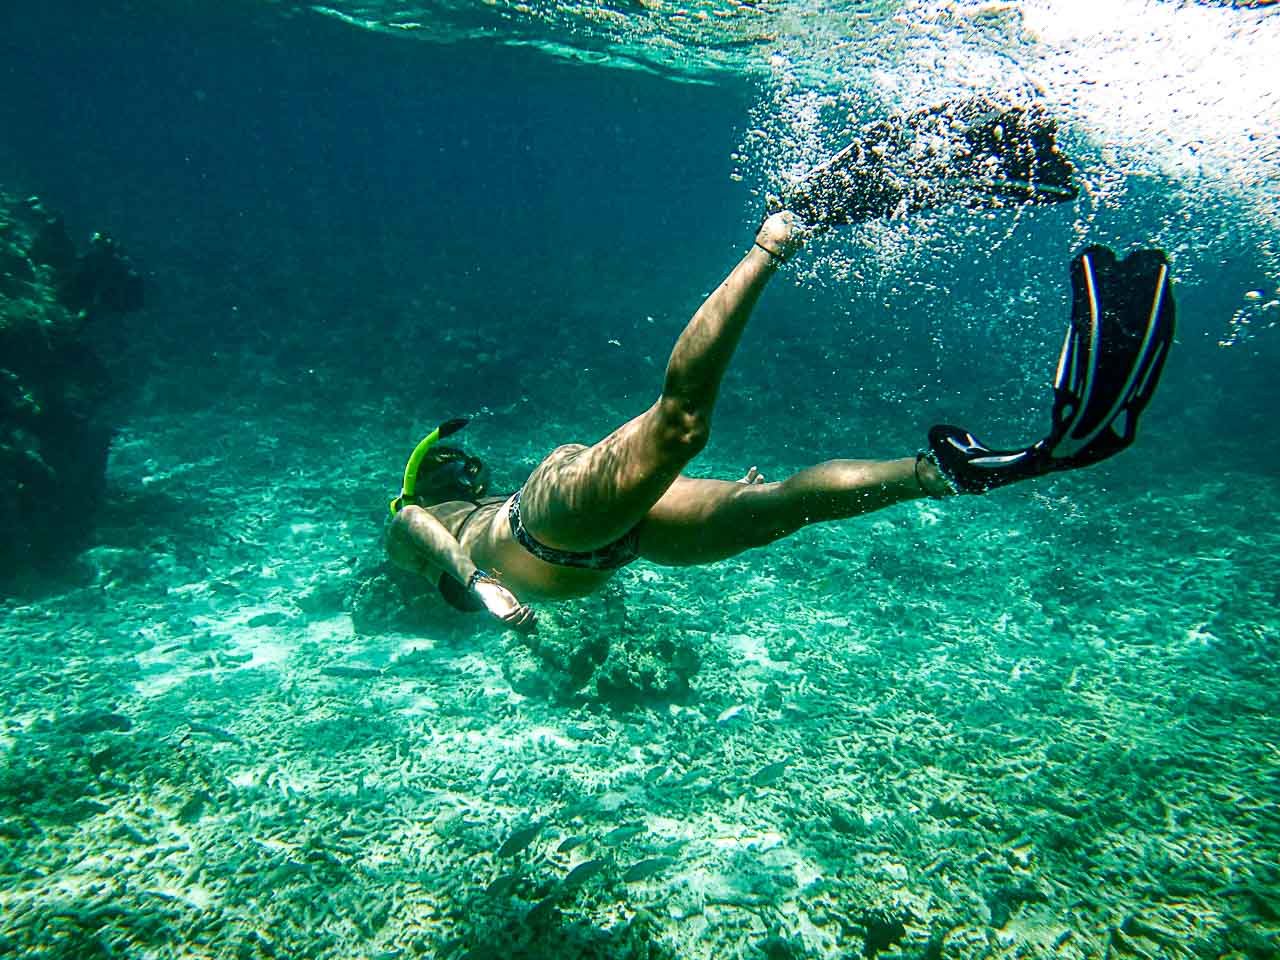 Snorkeling in Koh Tao is a must do. Go for the boat tours around the island.